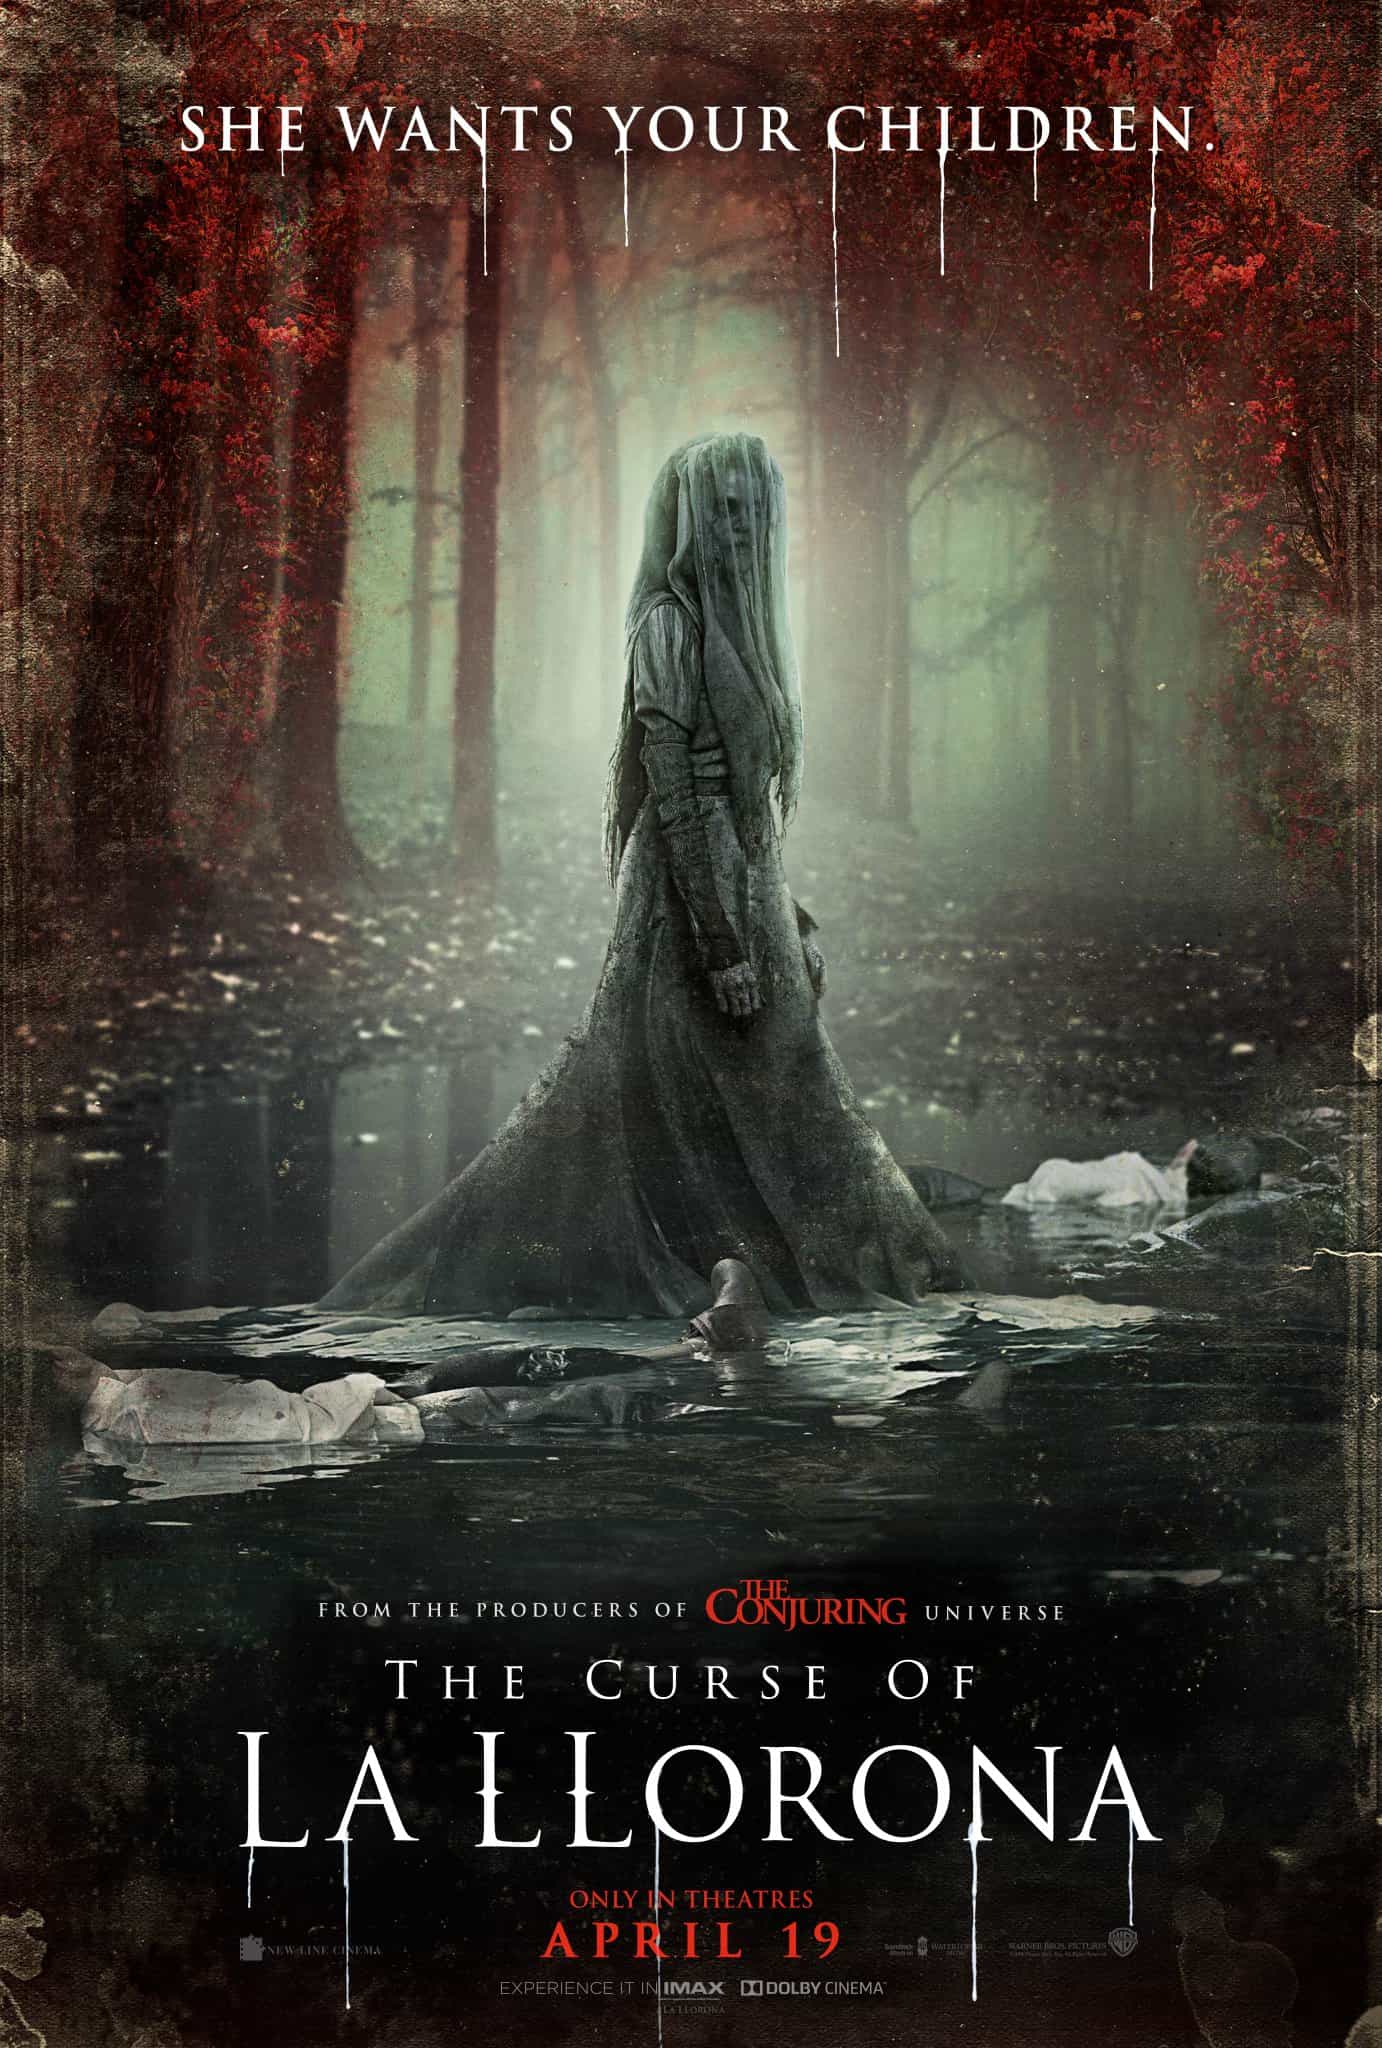 US Box Office Weekend 19 - 21 April 2019:  Audience go for the scares of The Curse Of La Llorona on its debut weekend